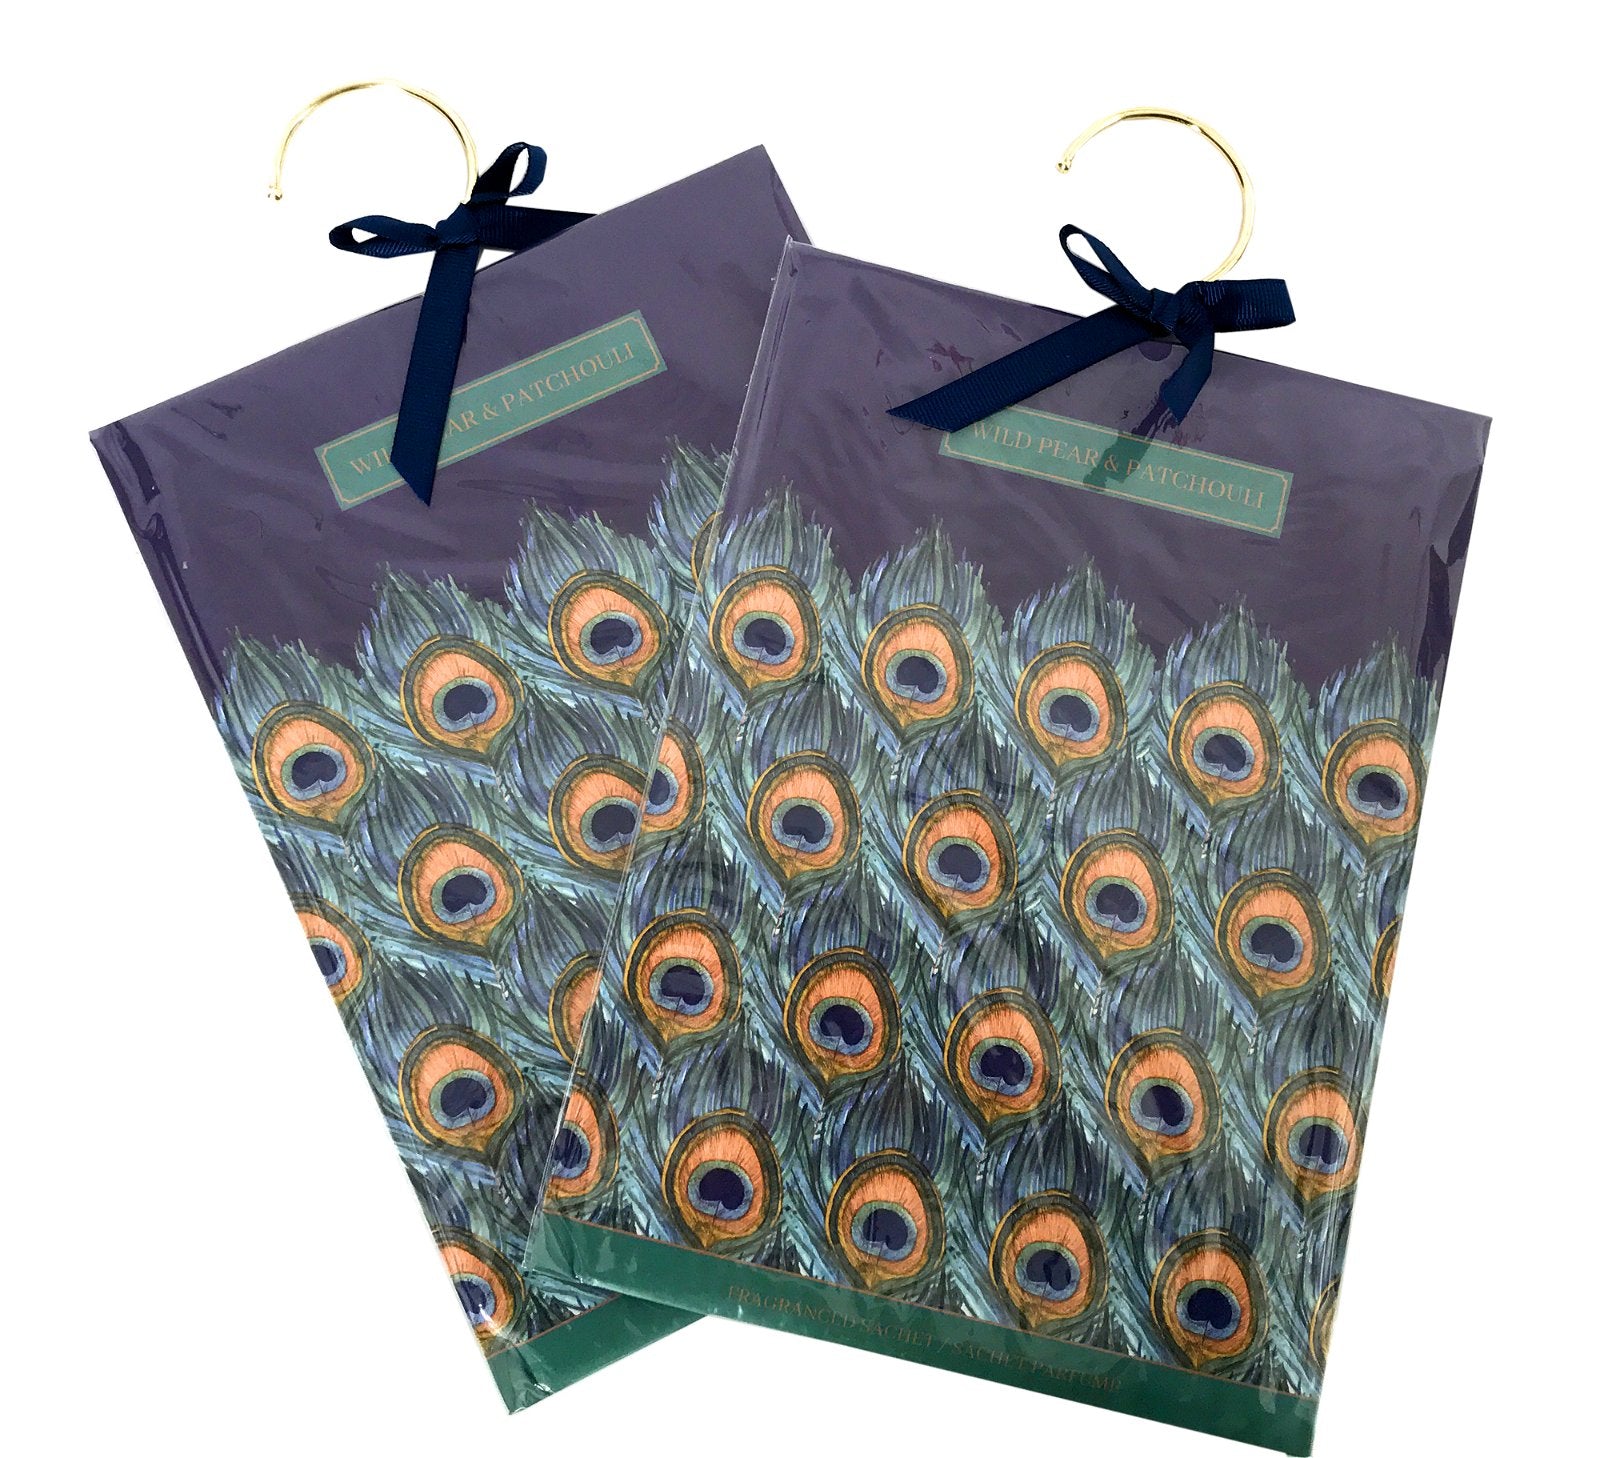 Pair Of Wild Pear & Patchouli Scented Wardrobe Sachet